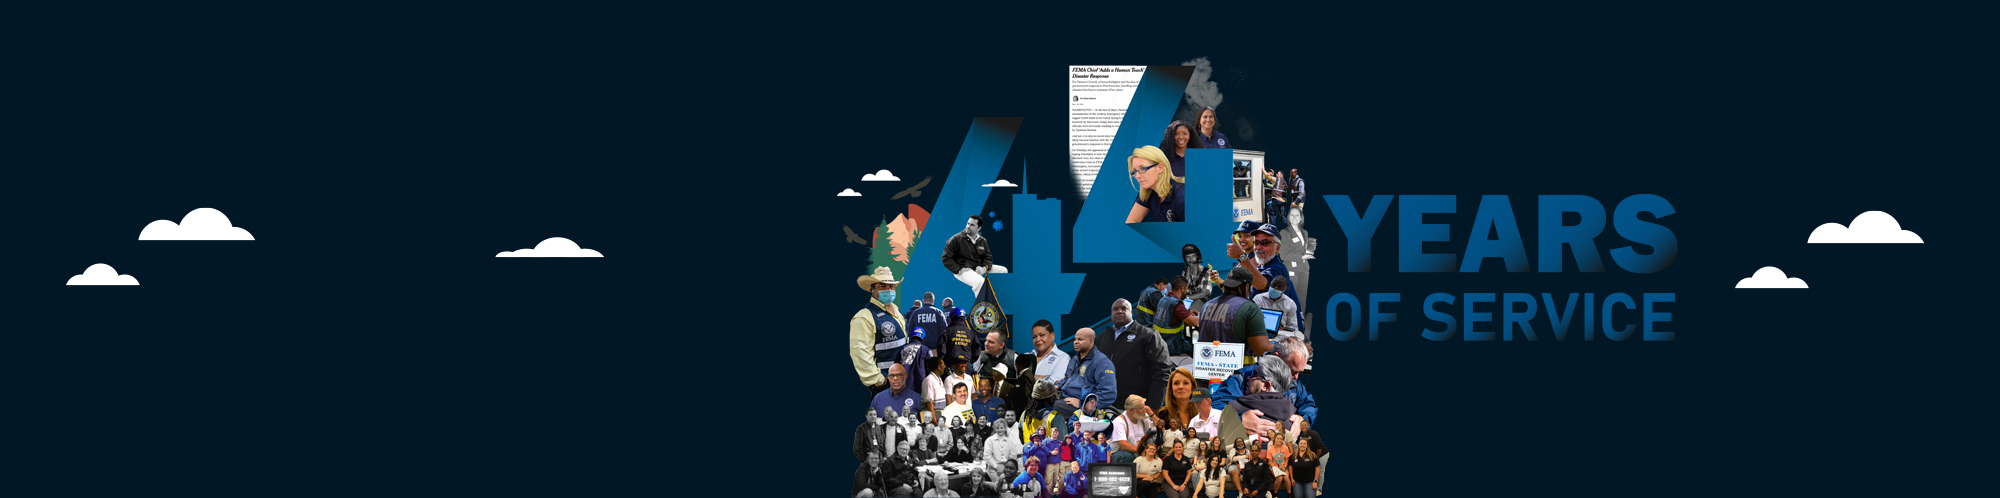 Pictures of FEMA employees are on a black background, with clouds. The text reads “44 years of service.”